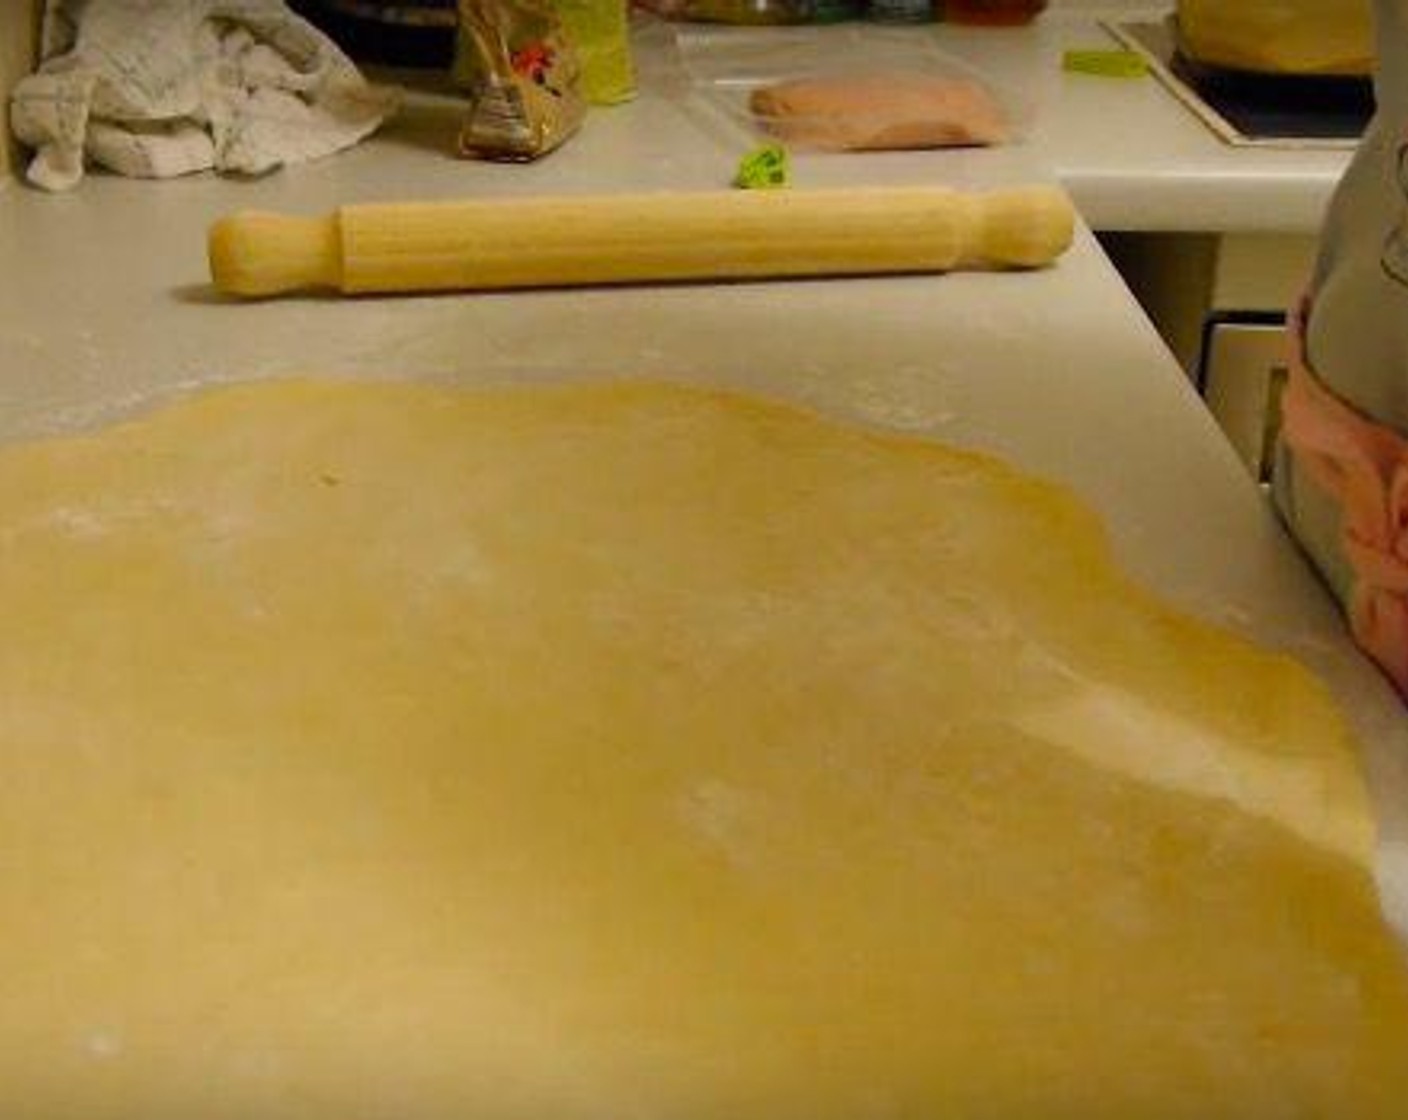 step 4 Once the dough has proved remove from the bowl and knead for another 3 minutes in a well floured surface. Extend the dough using a rolling pin until is 1/2 cm thick.